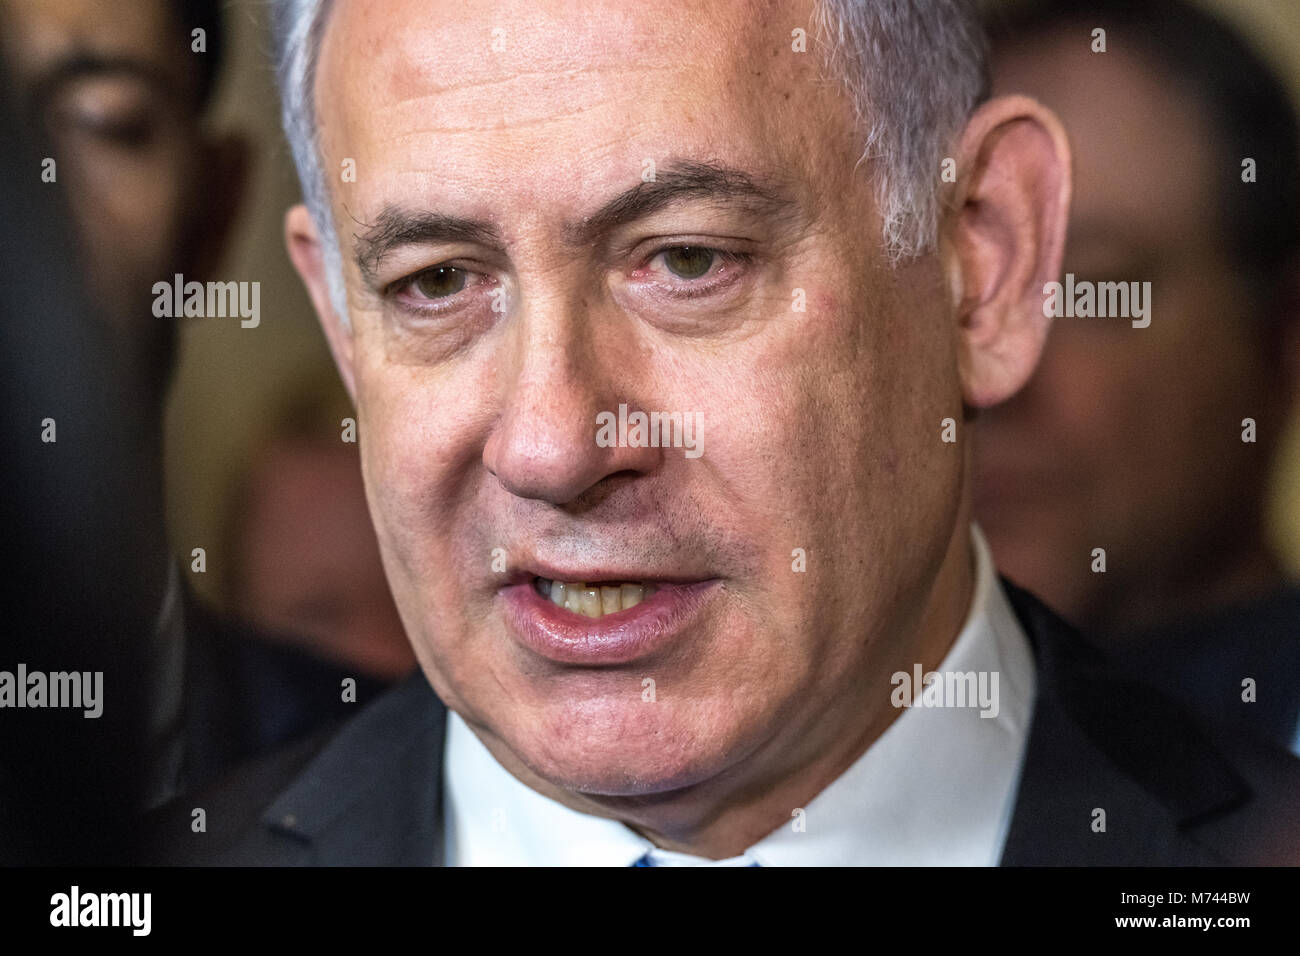 New York, USA, 8 Mar 2018. Israeli Prime Minister Benjamin Netanyahu speaks to reporters during the opening of a special exhibit on Jewish presence in Jerusalem at the United Nations Headquarters in New York City,  Photo by Enrique Shore/Alamy Live News Stock Photo